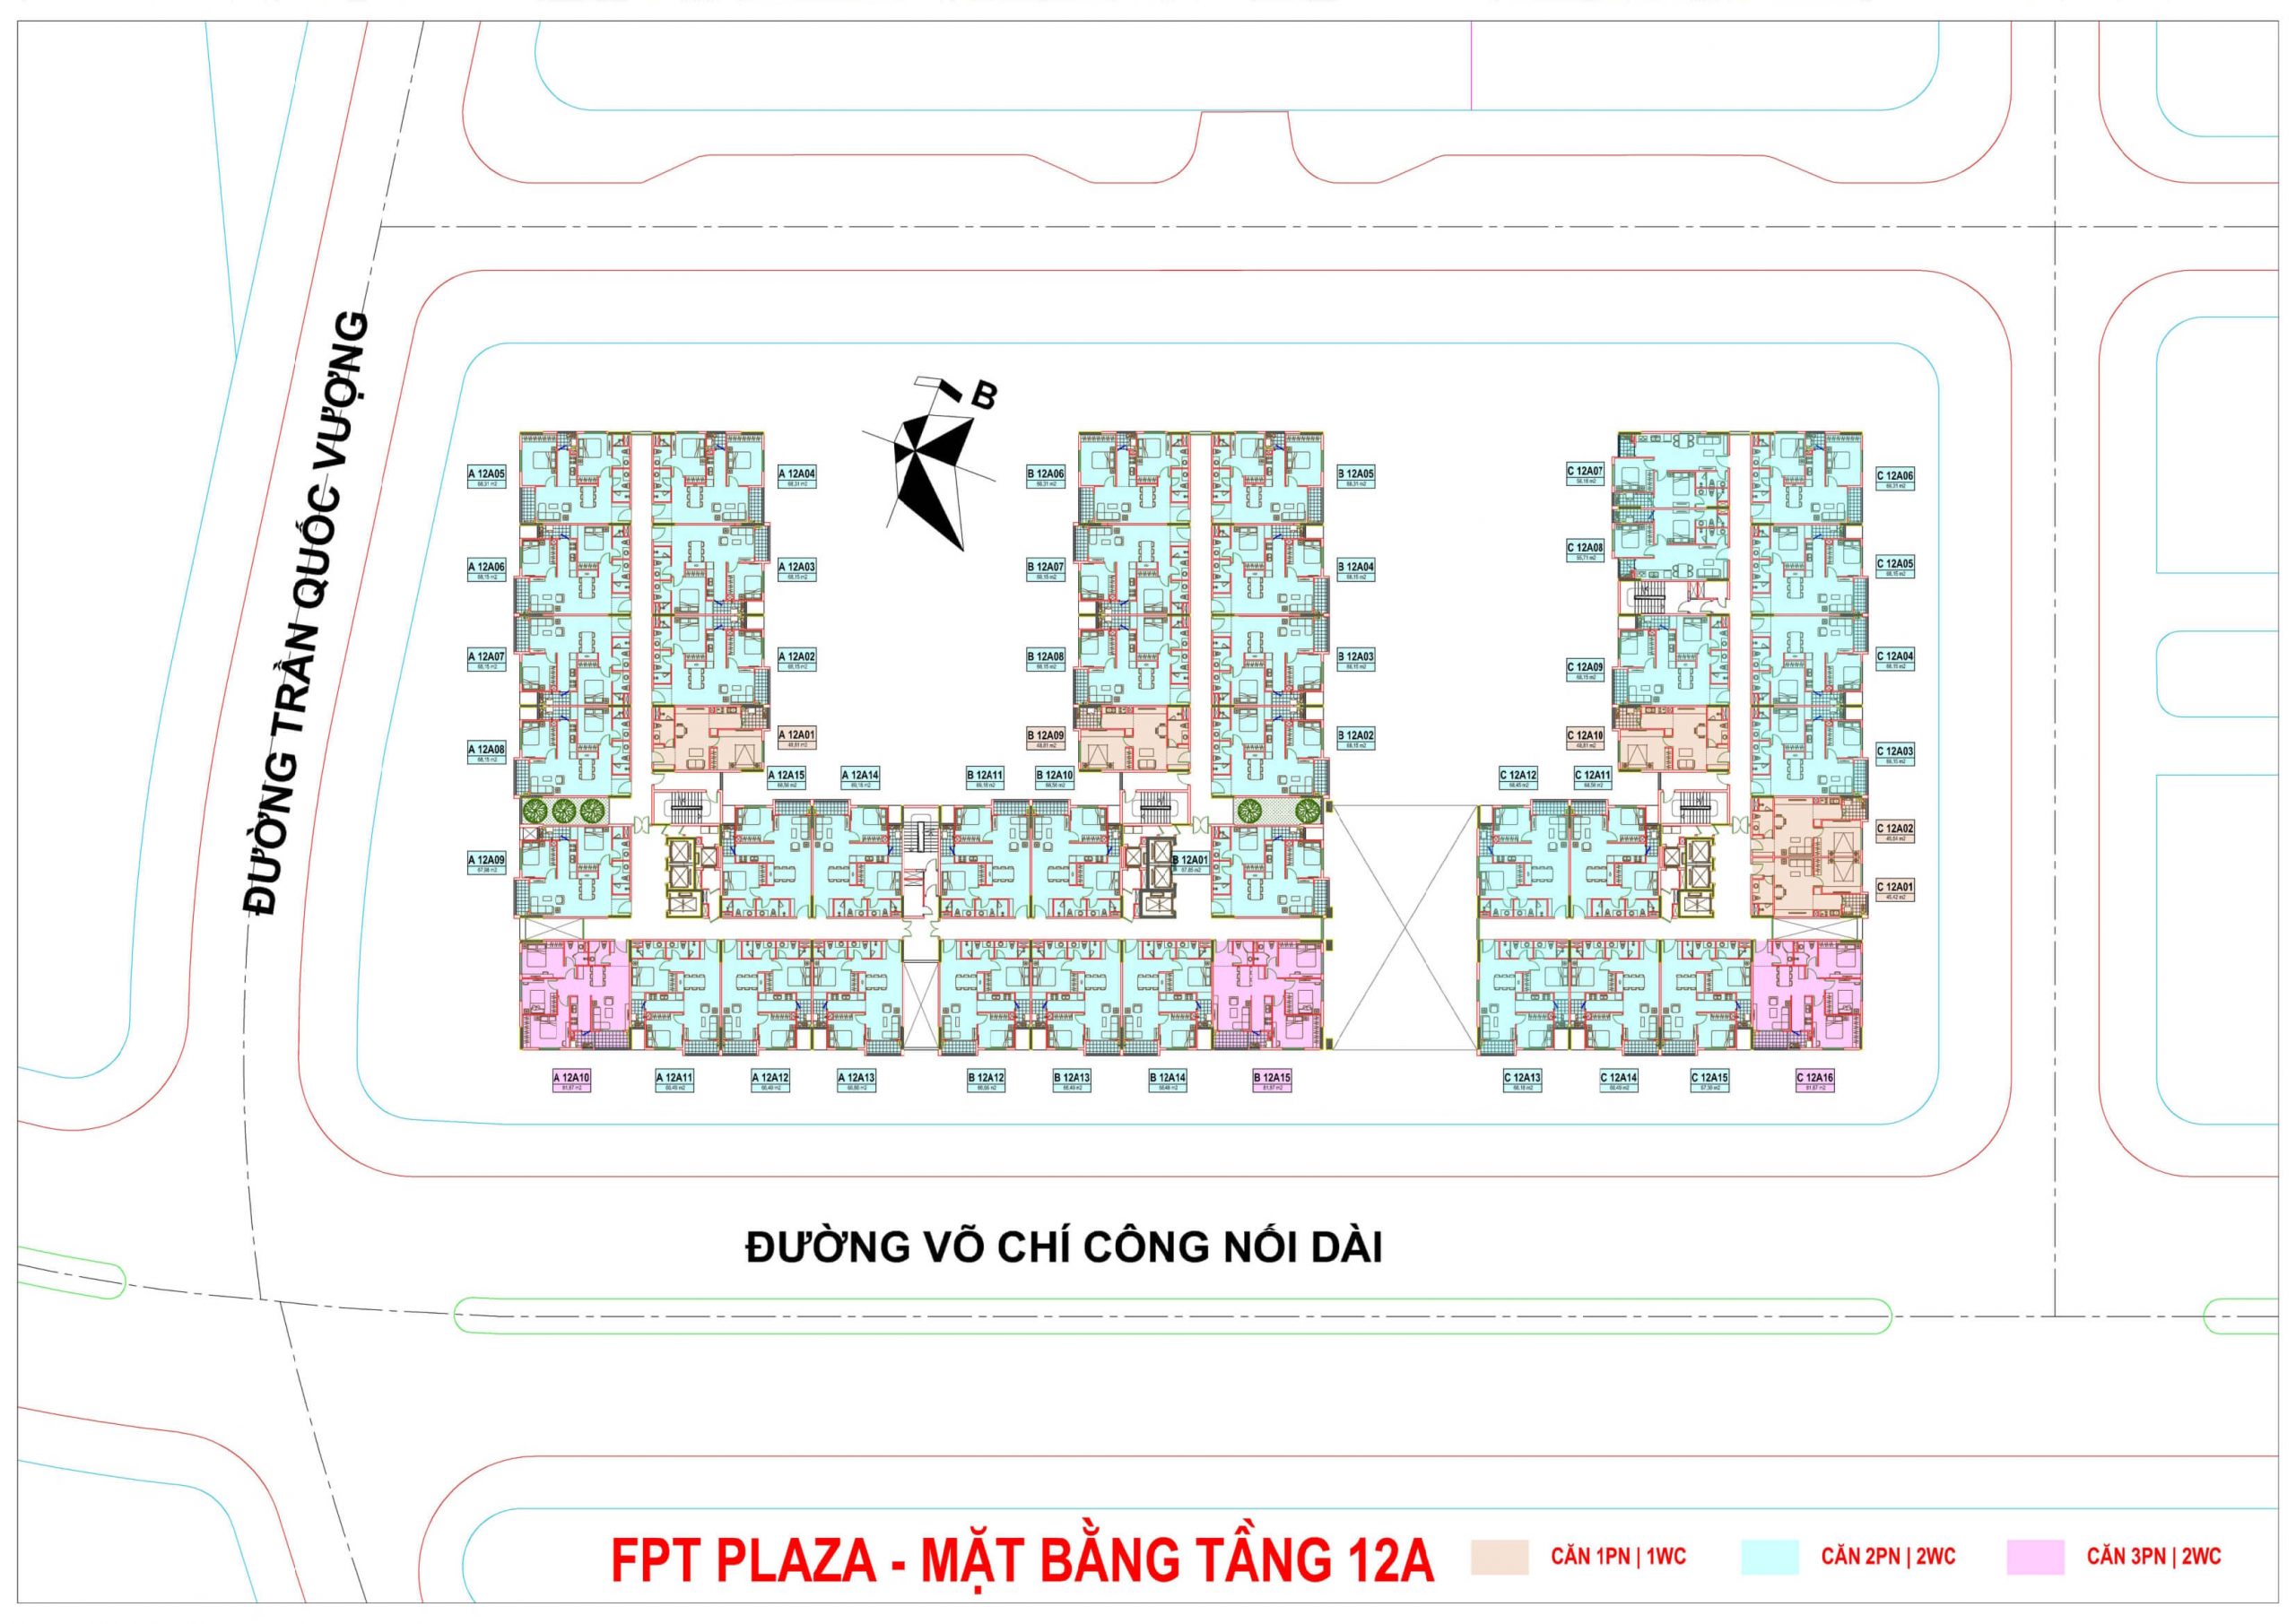 FPT PLAZA 1 Mặt bằng tầng 12A